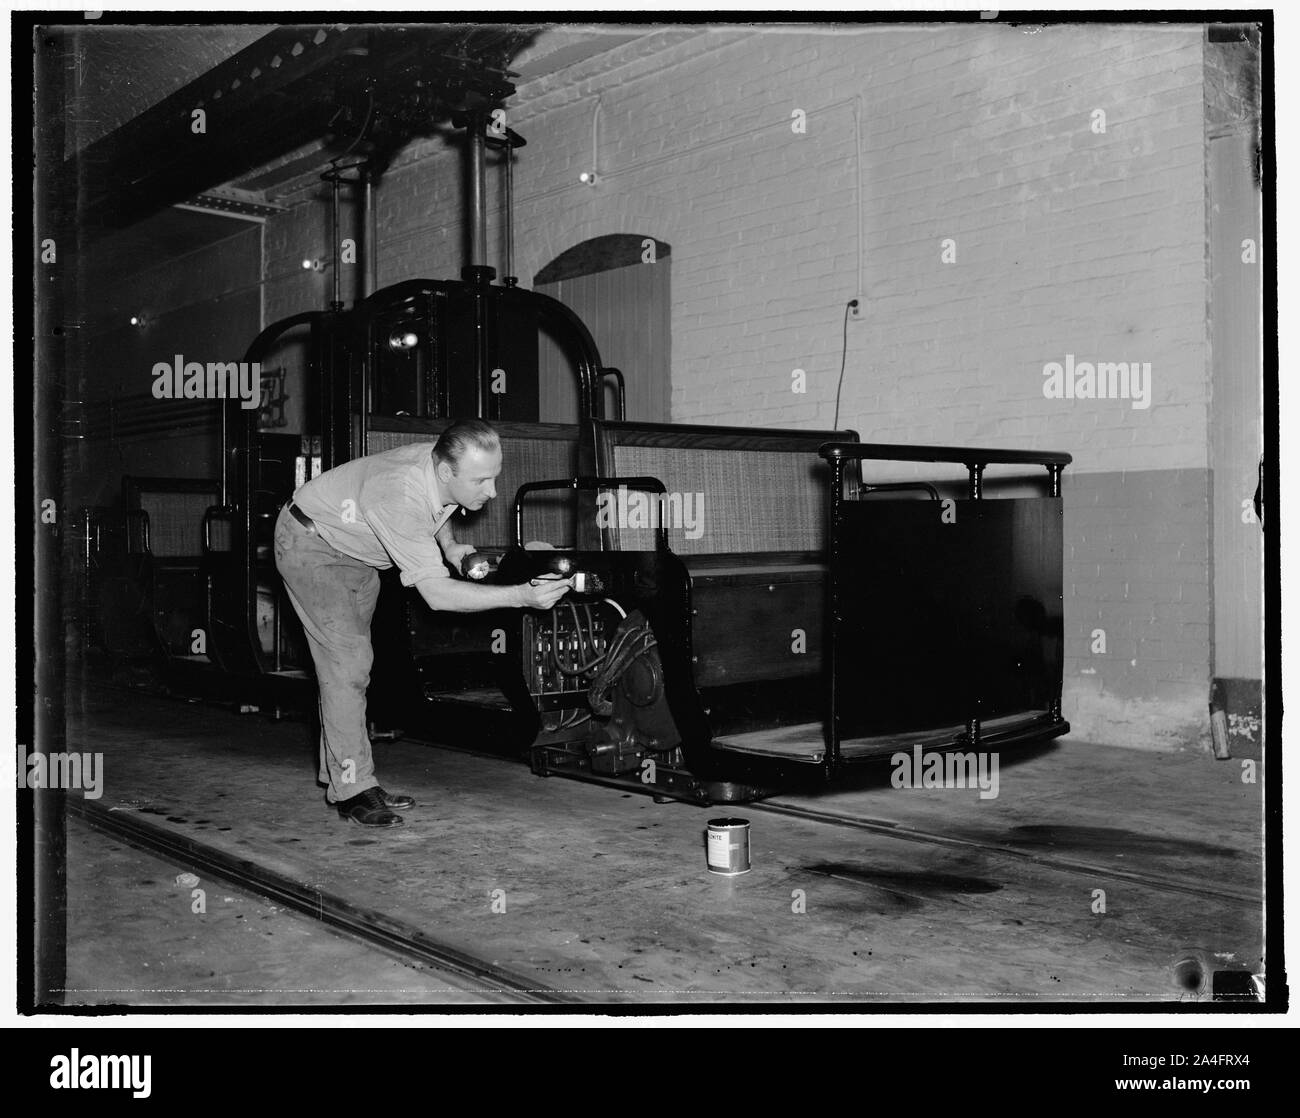 Tram cars readied for senators. Washington, D.C., Nov. 9. The tram cars used by the senators in going thru the subway from their offices to the Capitol have been given a new coat of paint and an engine overhauling in readiness for the special session November 15. 11/9/37 Stock Photo